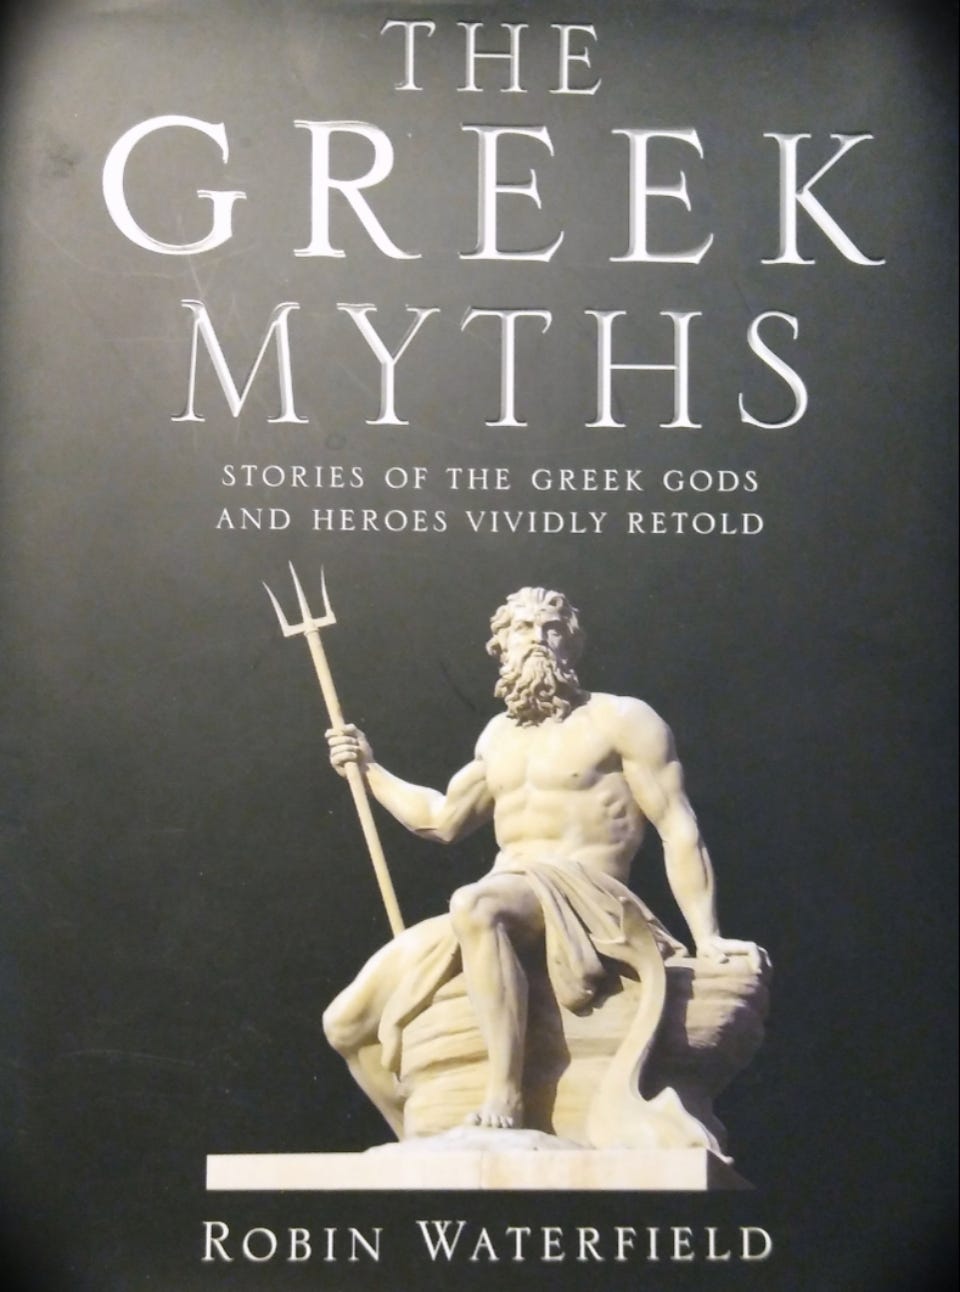 "The Greek Myths" is a great resource for Ancient Greek stories and their gods and characters